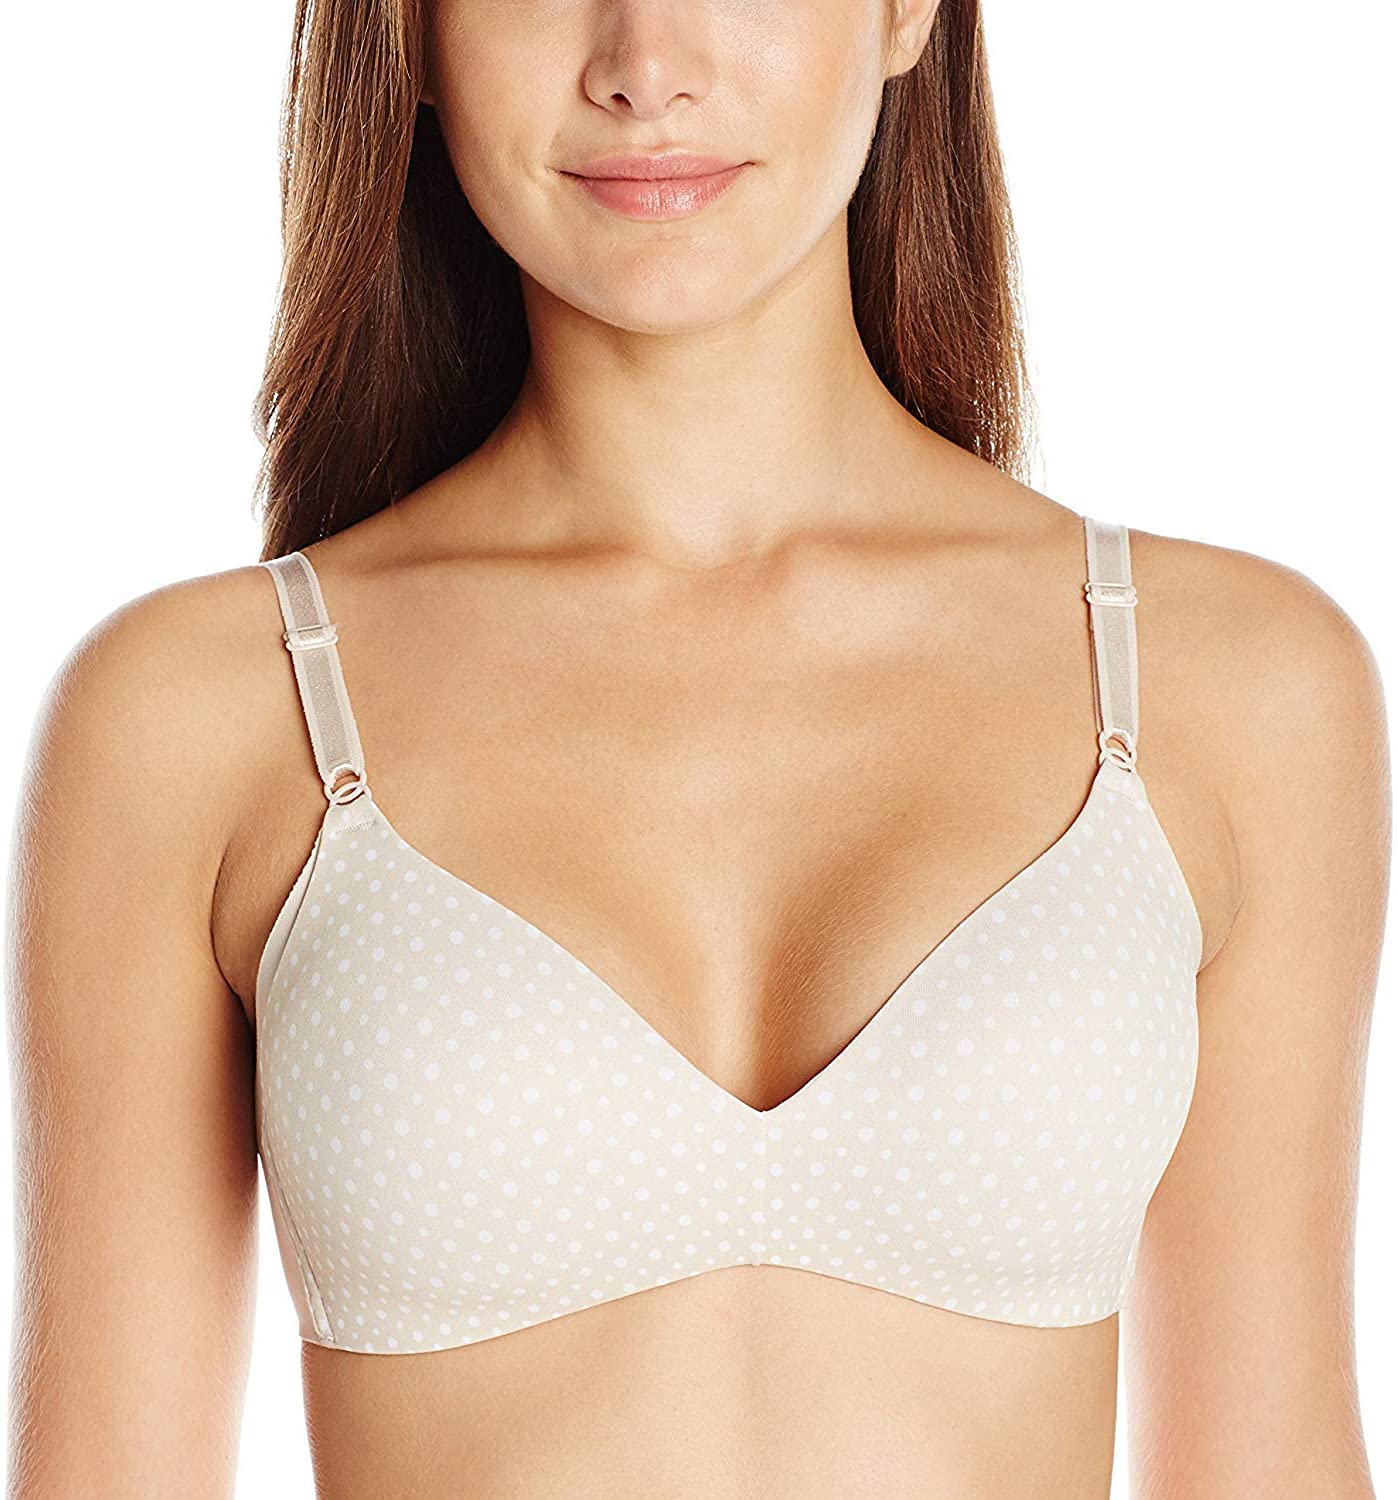 Best No-Bulge Wire-free Bra for Sagging Breasts